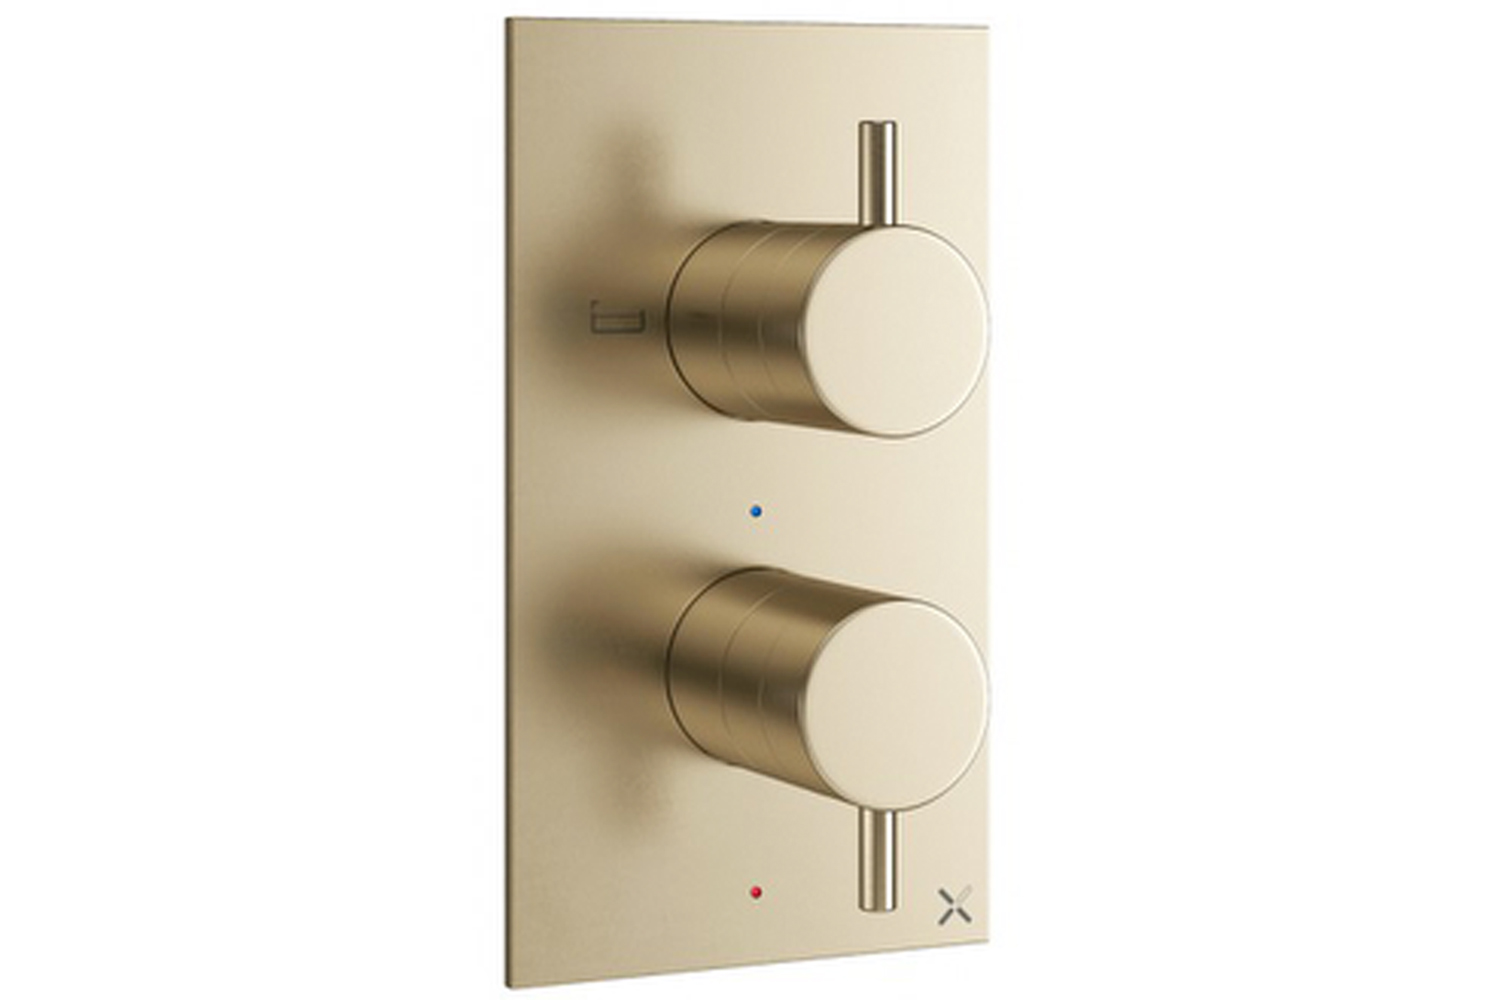 The MPRO collection is made up of polished chrome polished nickel and stainless    